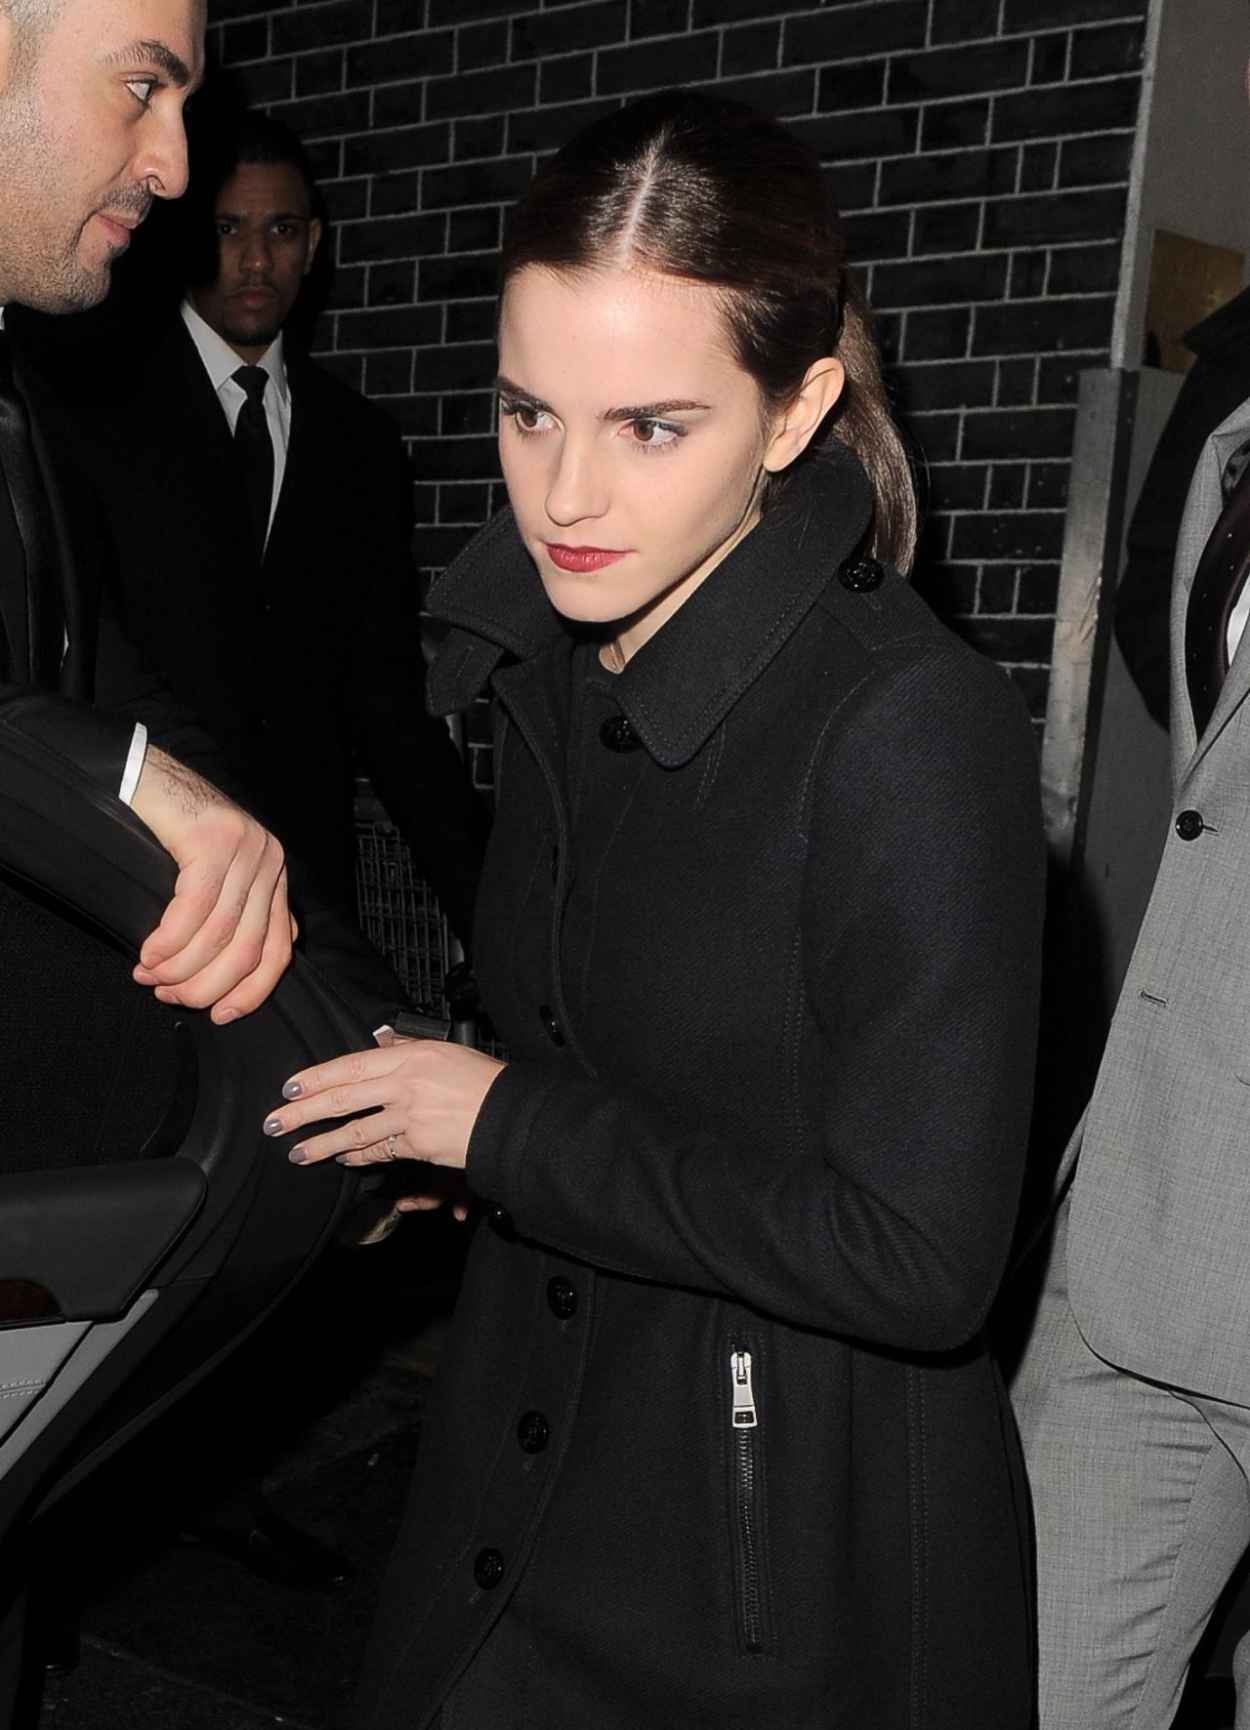 Emma Watson Leaving Lady Gagas Private Gig in London - December 2015-1